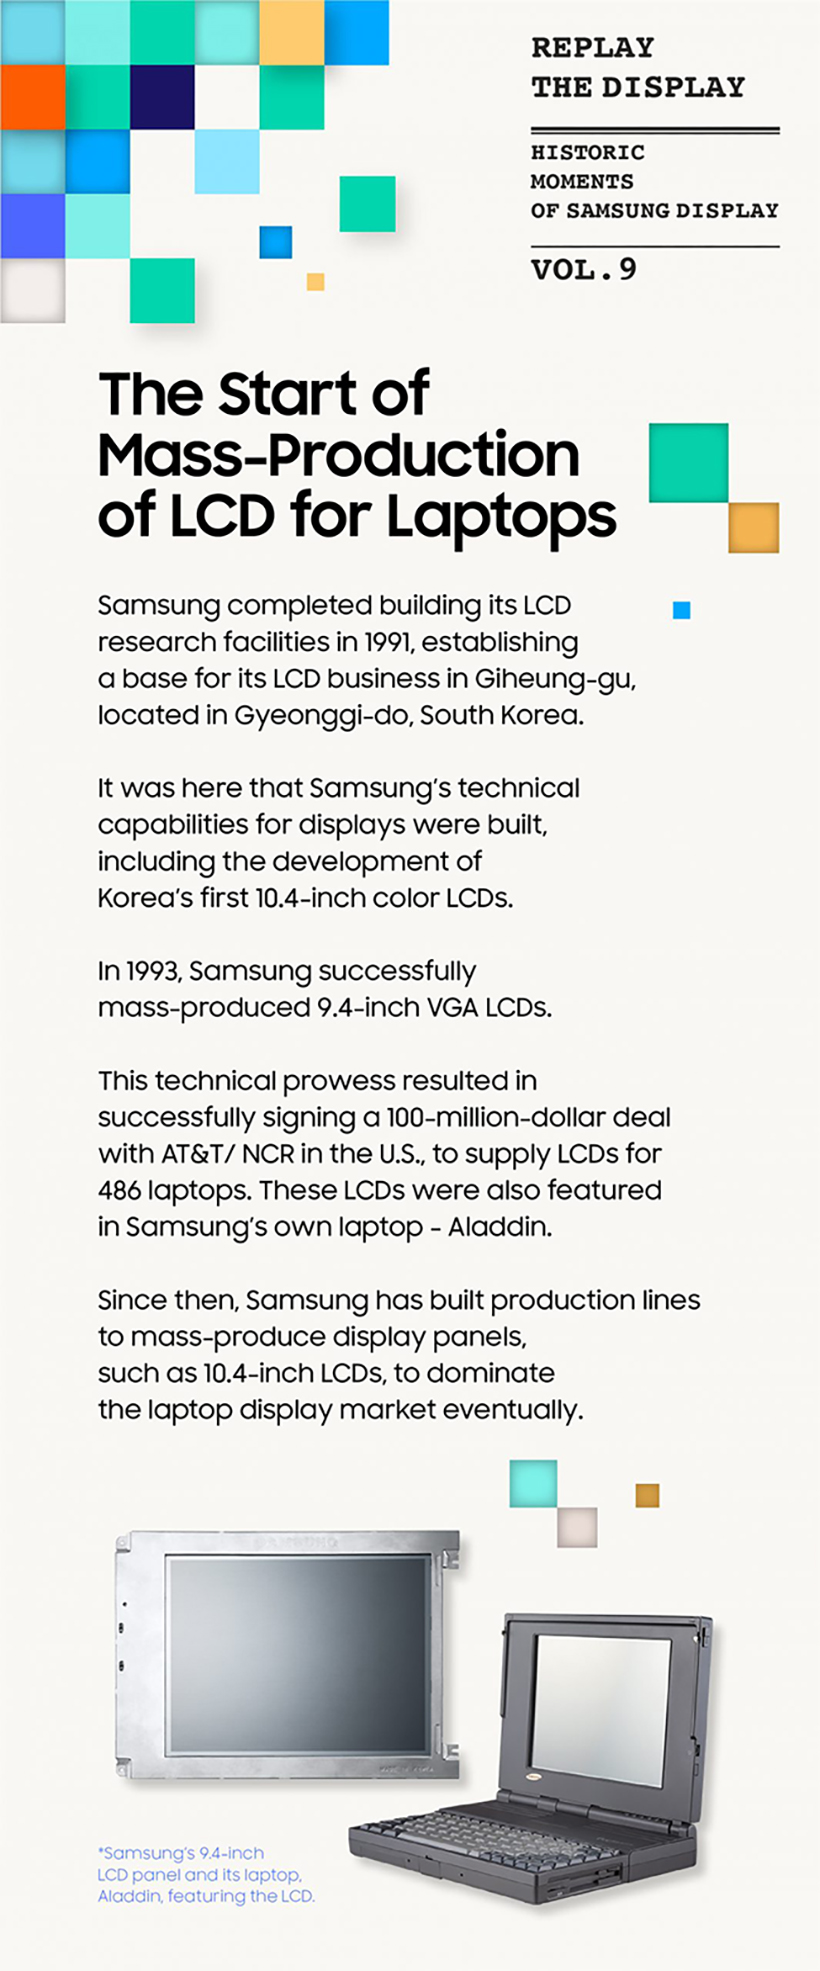 Samsung Display | The Start of Mass Production of LCD Laptops